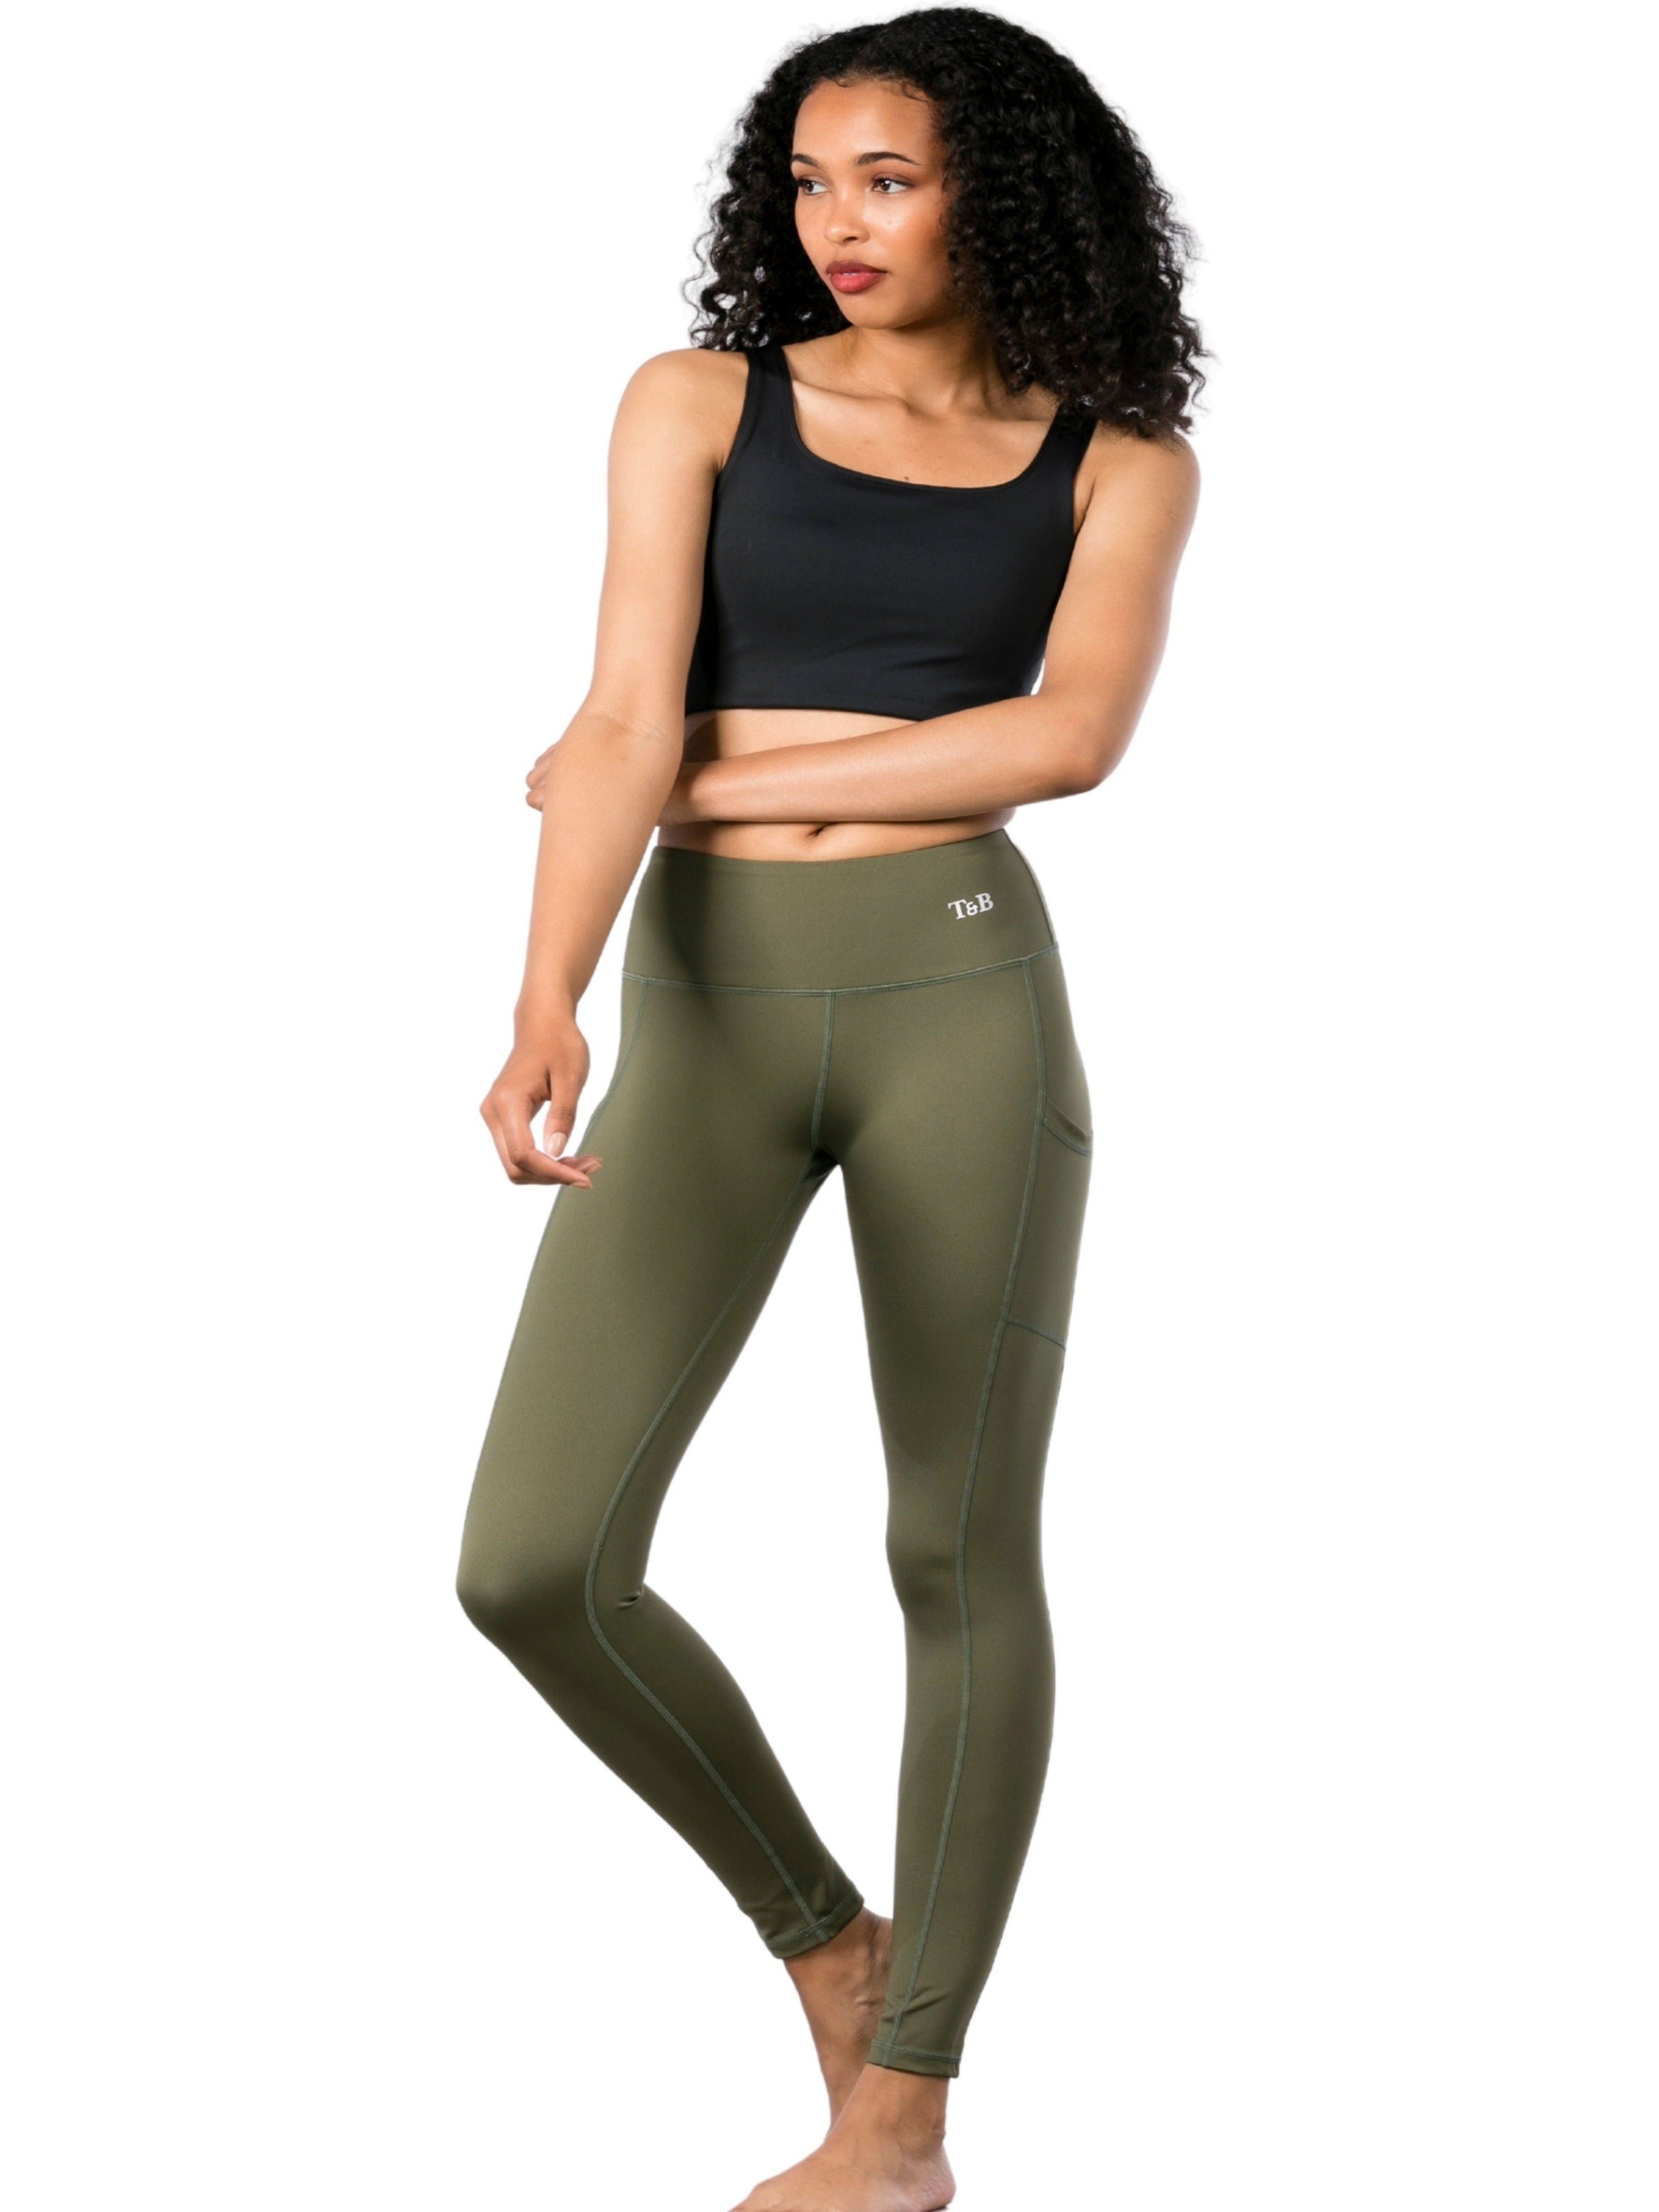 Trendy and Bendy high performing leggings in olive green provide figure shaping support, with high-waisted compression & cellulite control. Designed for yoga, pilates, running, high & low intensity workouts, they are 100% squat proof.